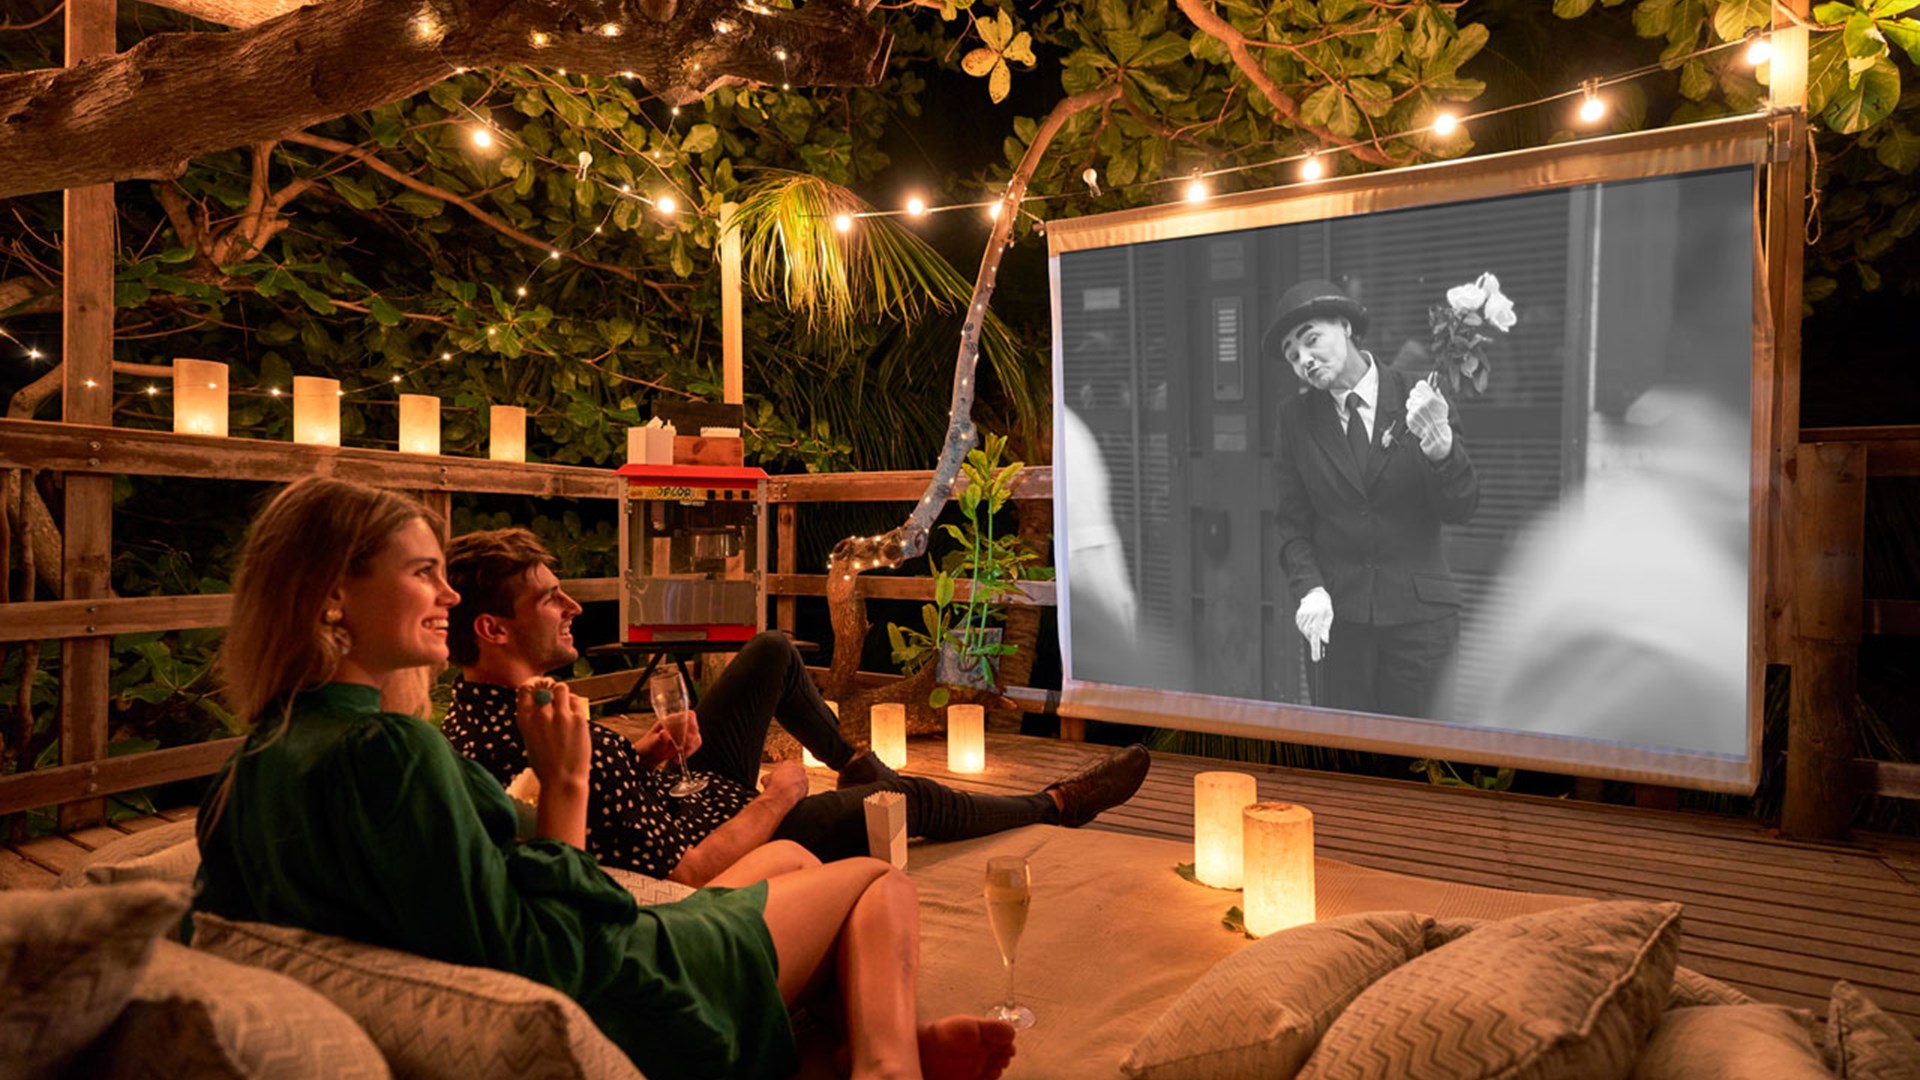 Cinema Paradiso in the Tree House, LUX* Le Morne